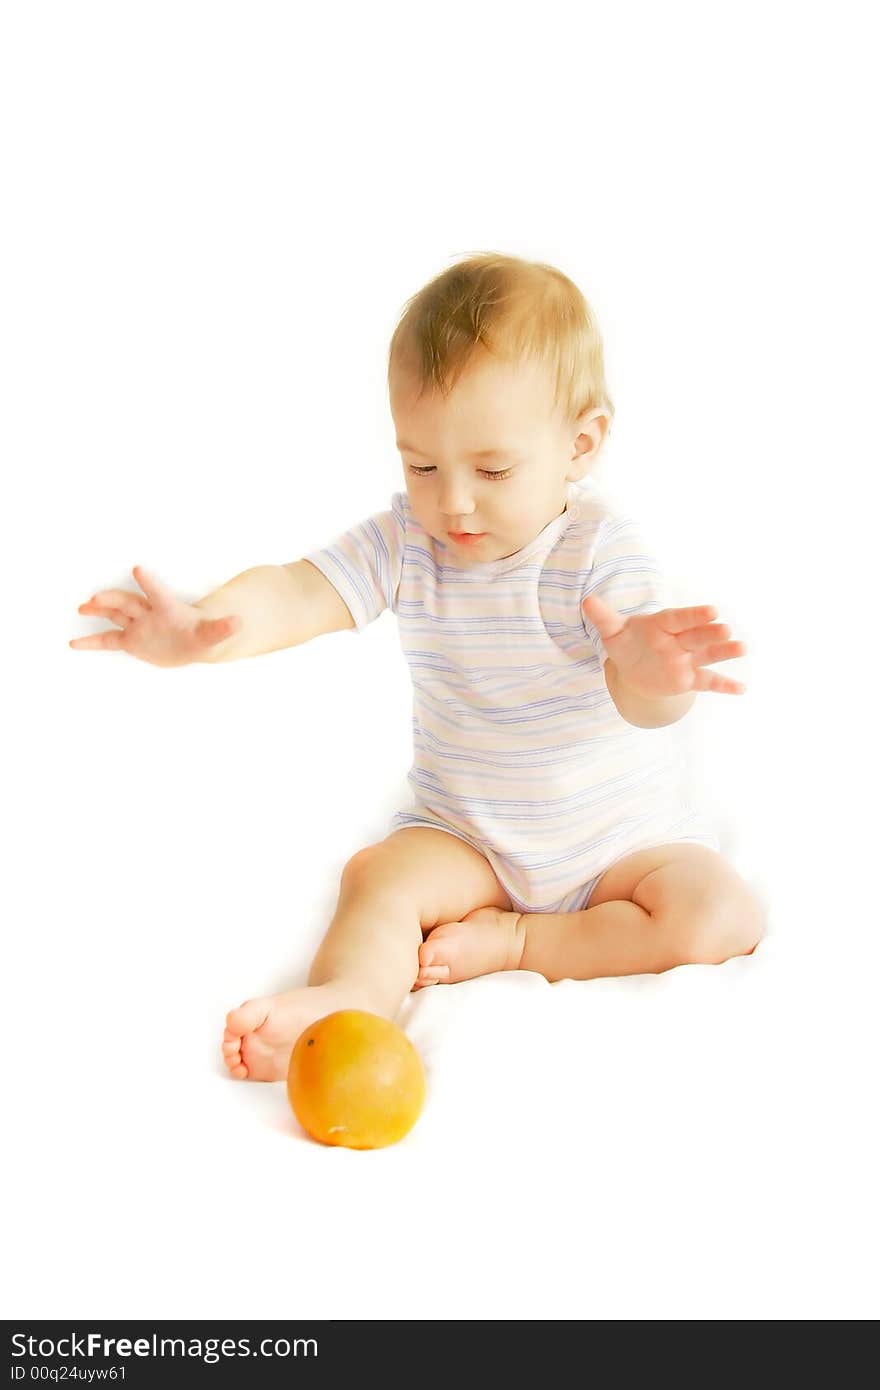 Baby tryinh to catch an orange over white